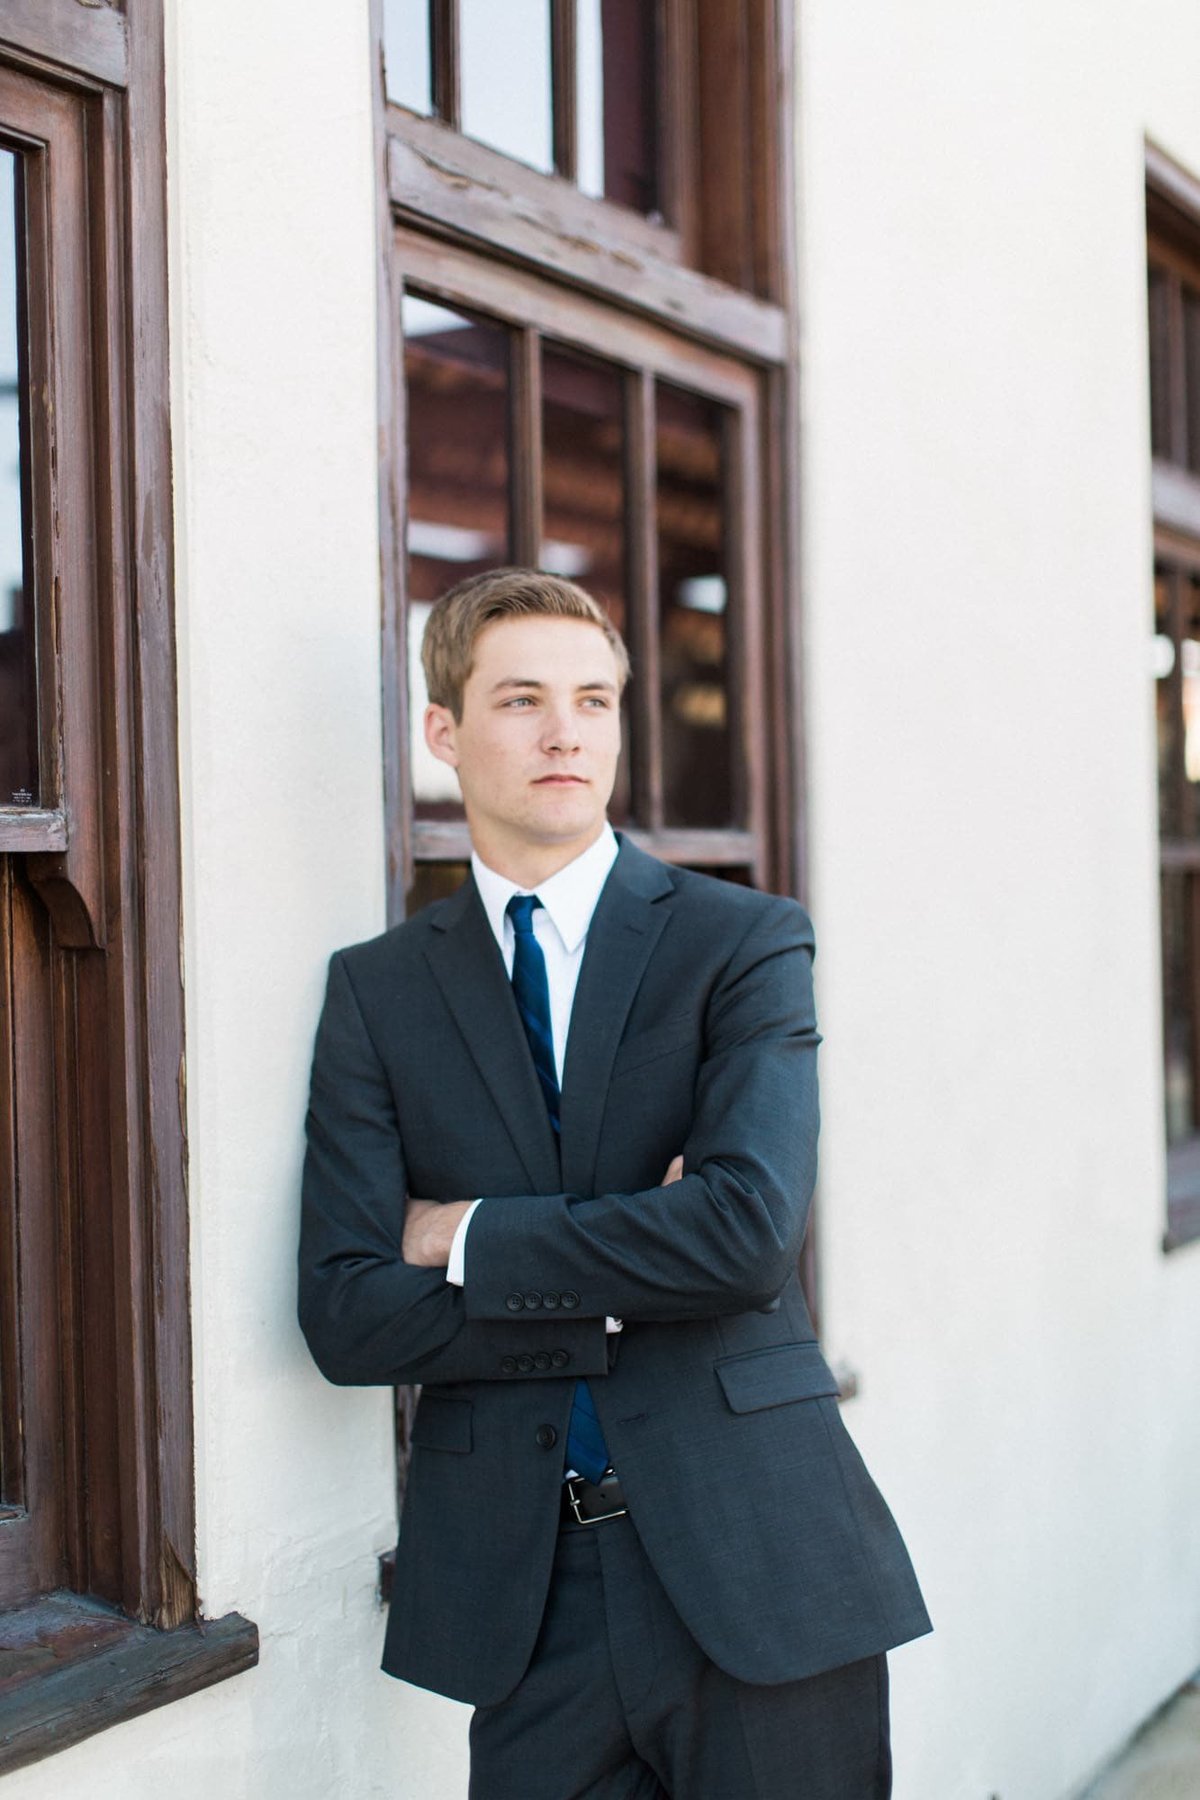 Young man dressed in a suit leans against a wall during his senior portrait photo session